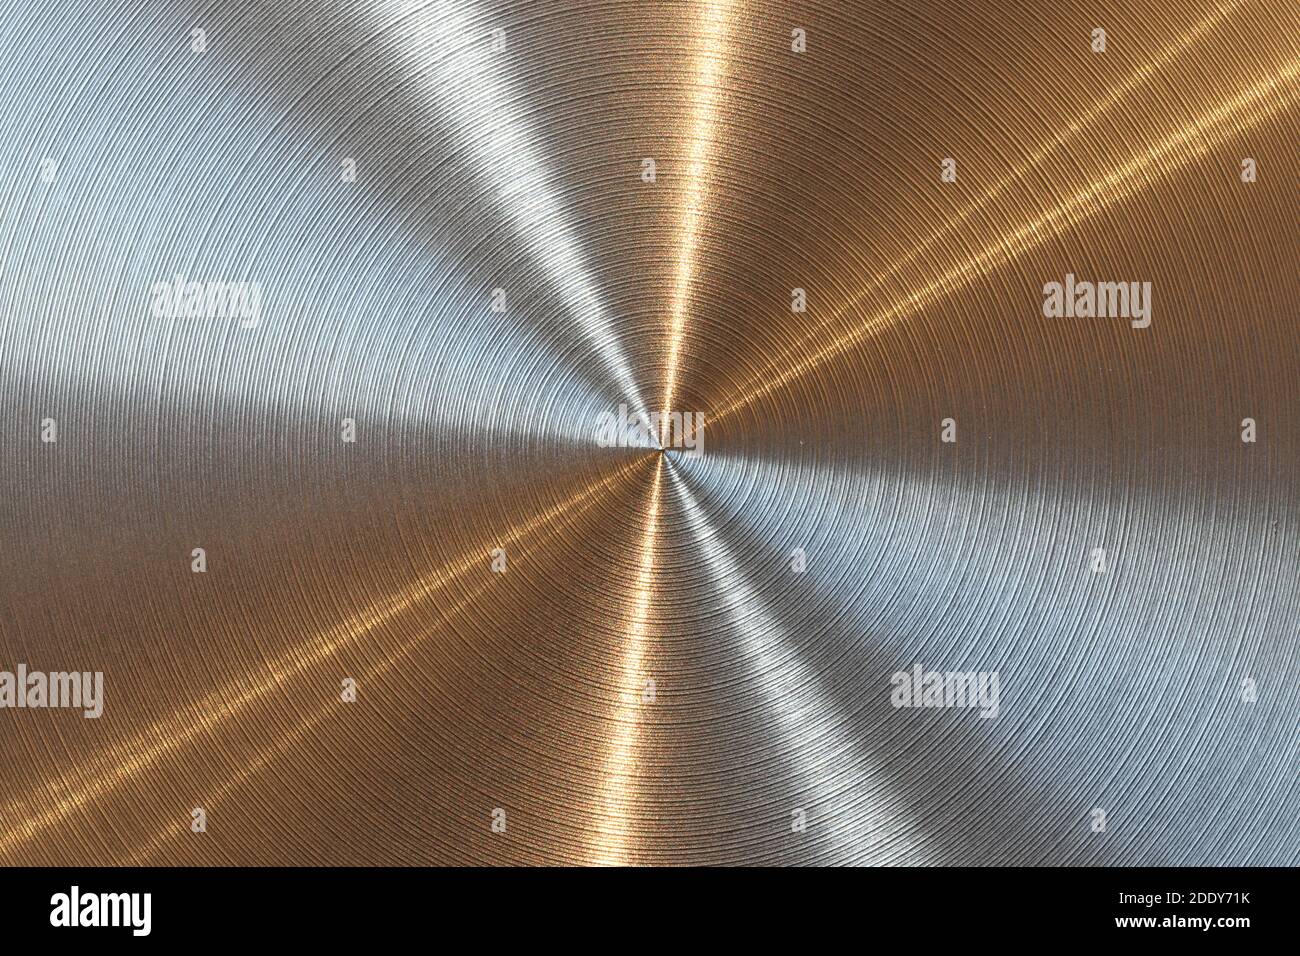 reflections on machined metal surface as background pattern Stock Photo